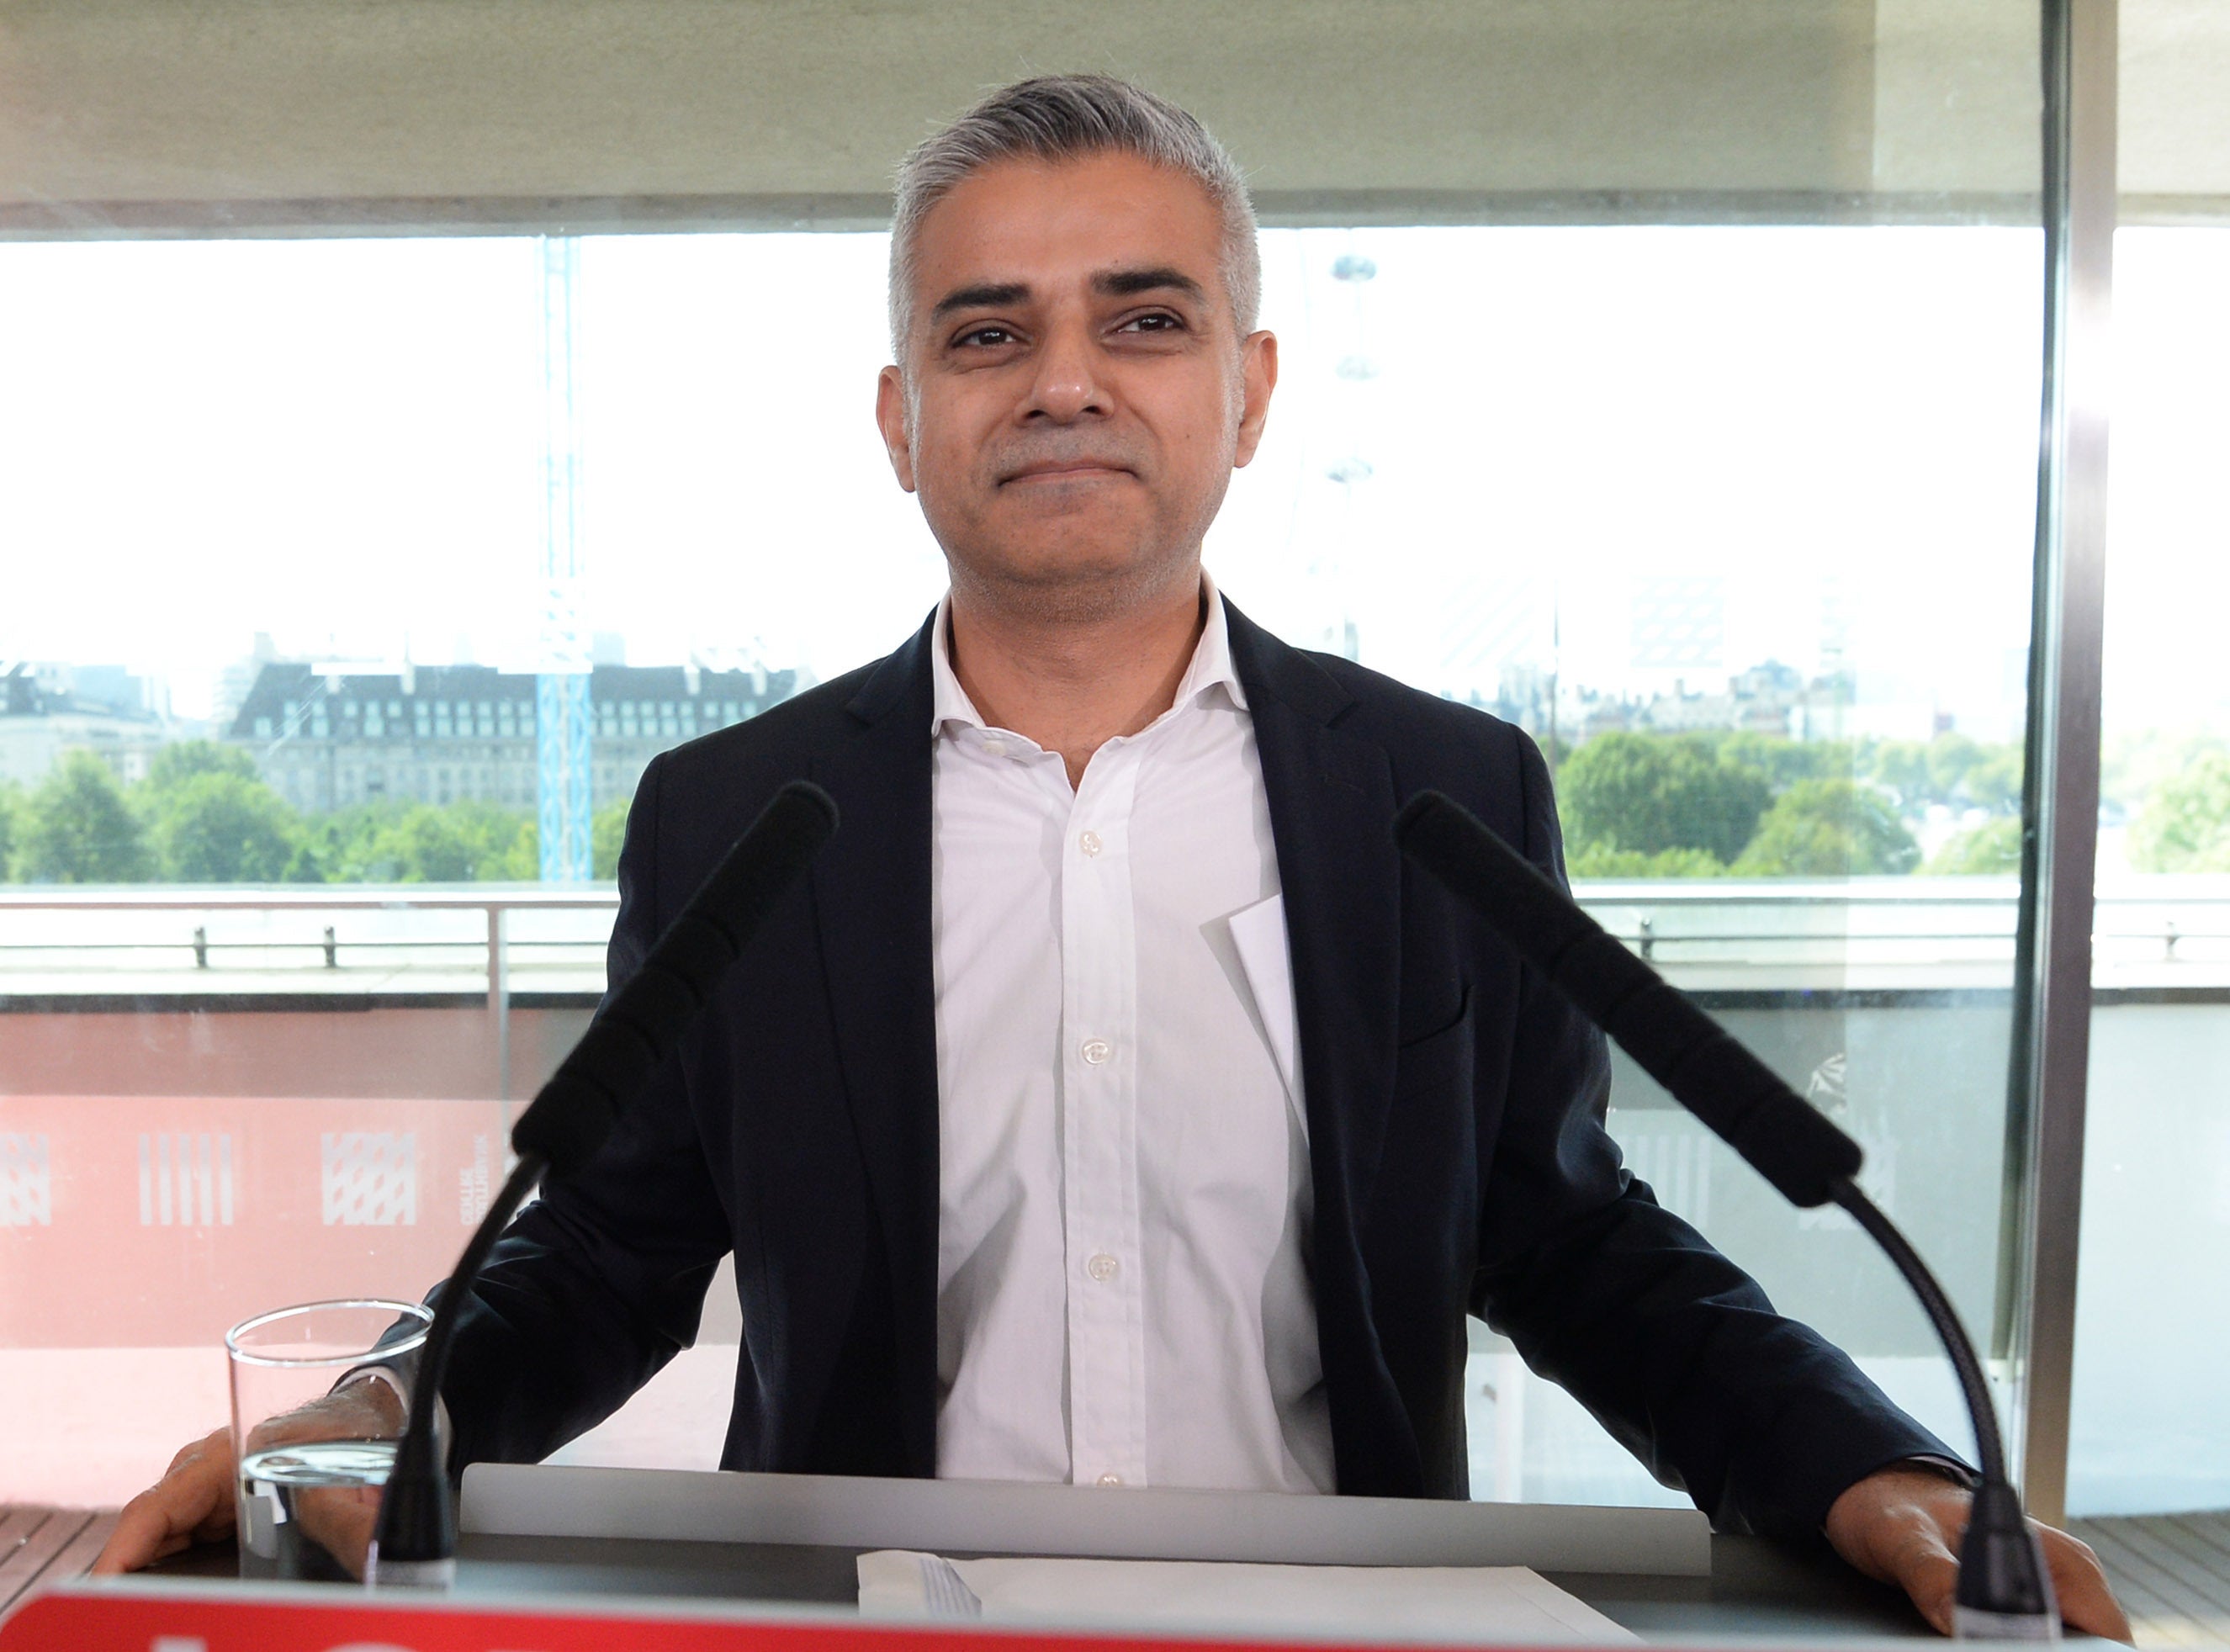 Sadiq Khan, Labour's candidate for London Mayor in next May's election